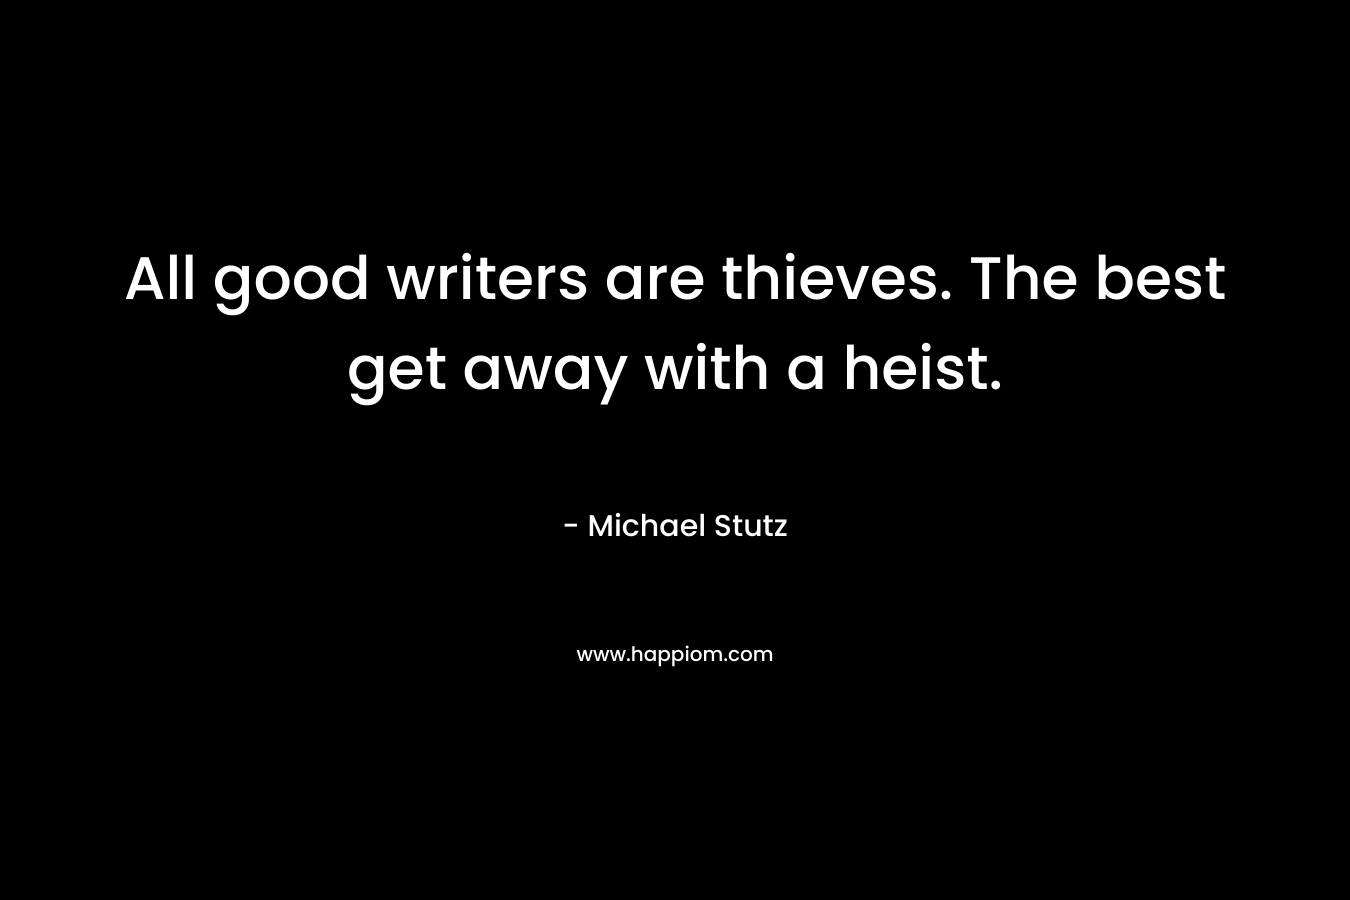 All good writers are thieves. The best get away with a heist.